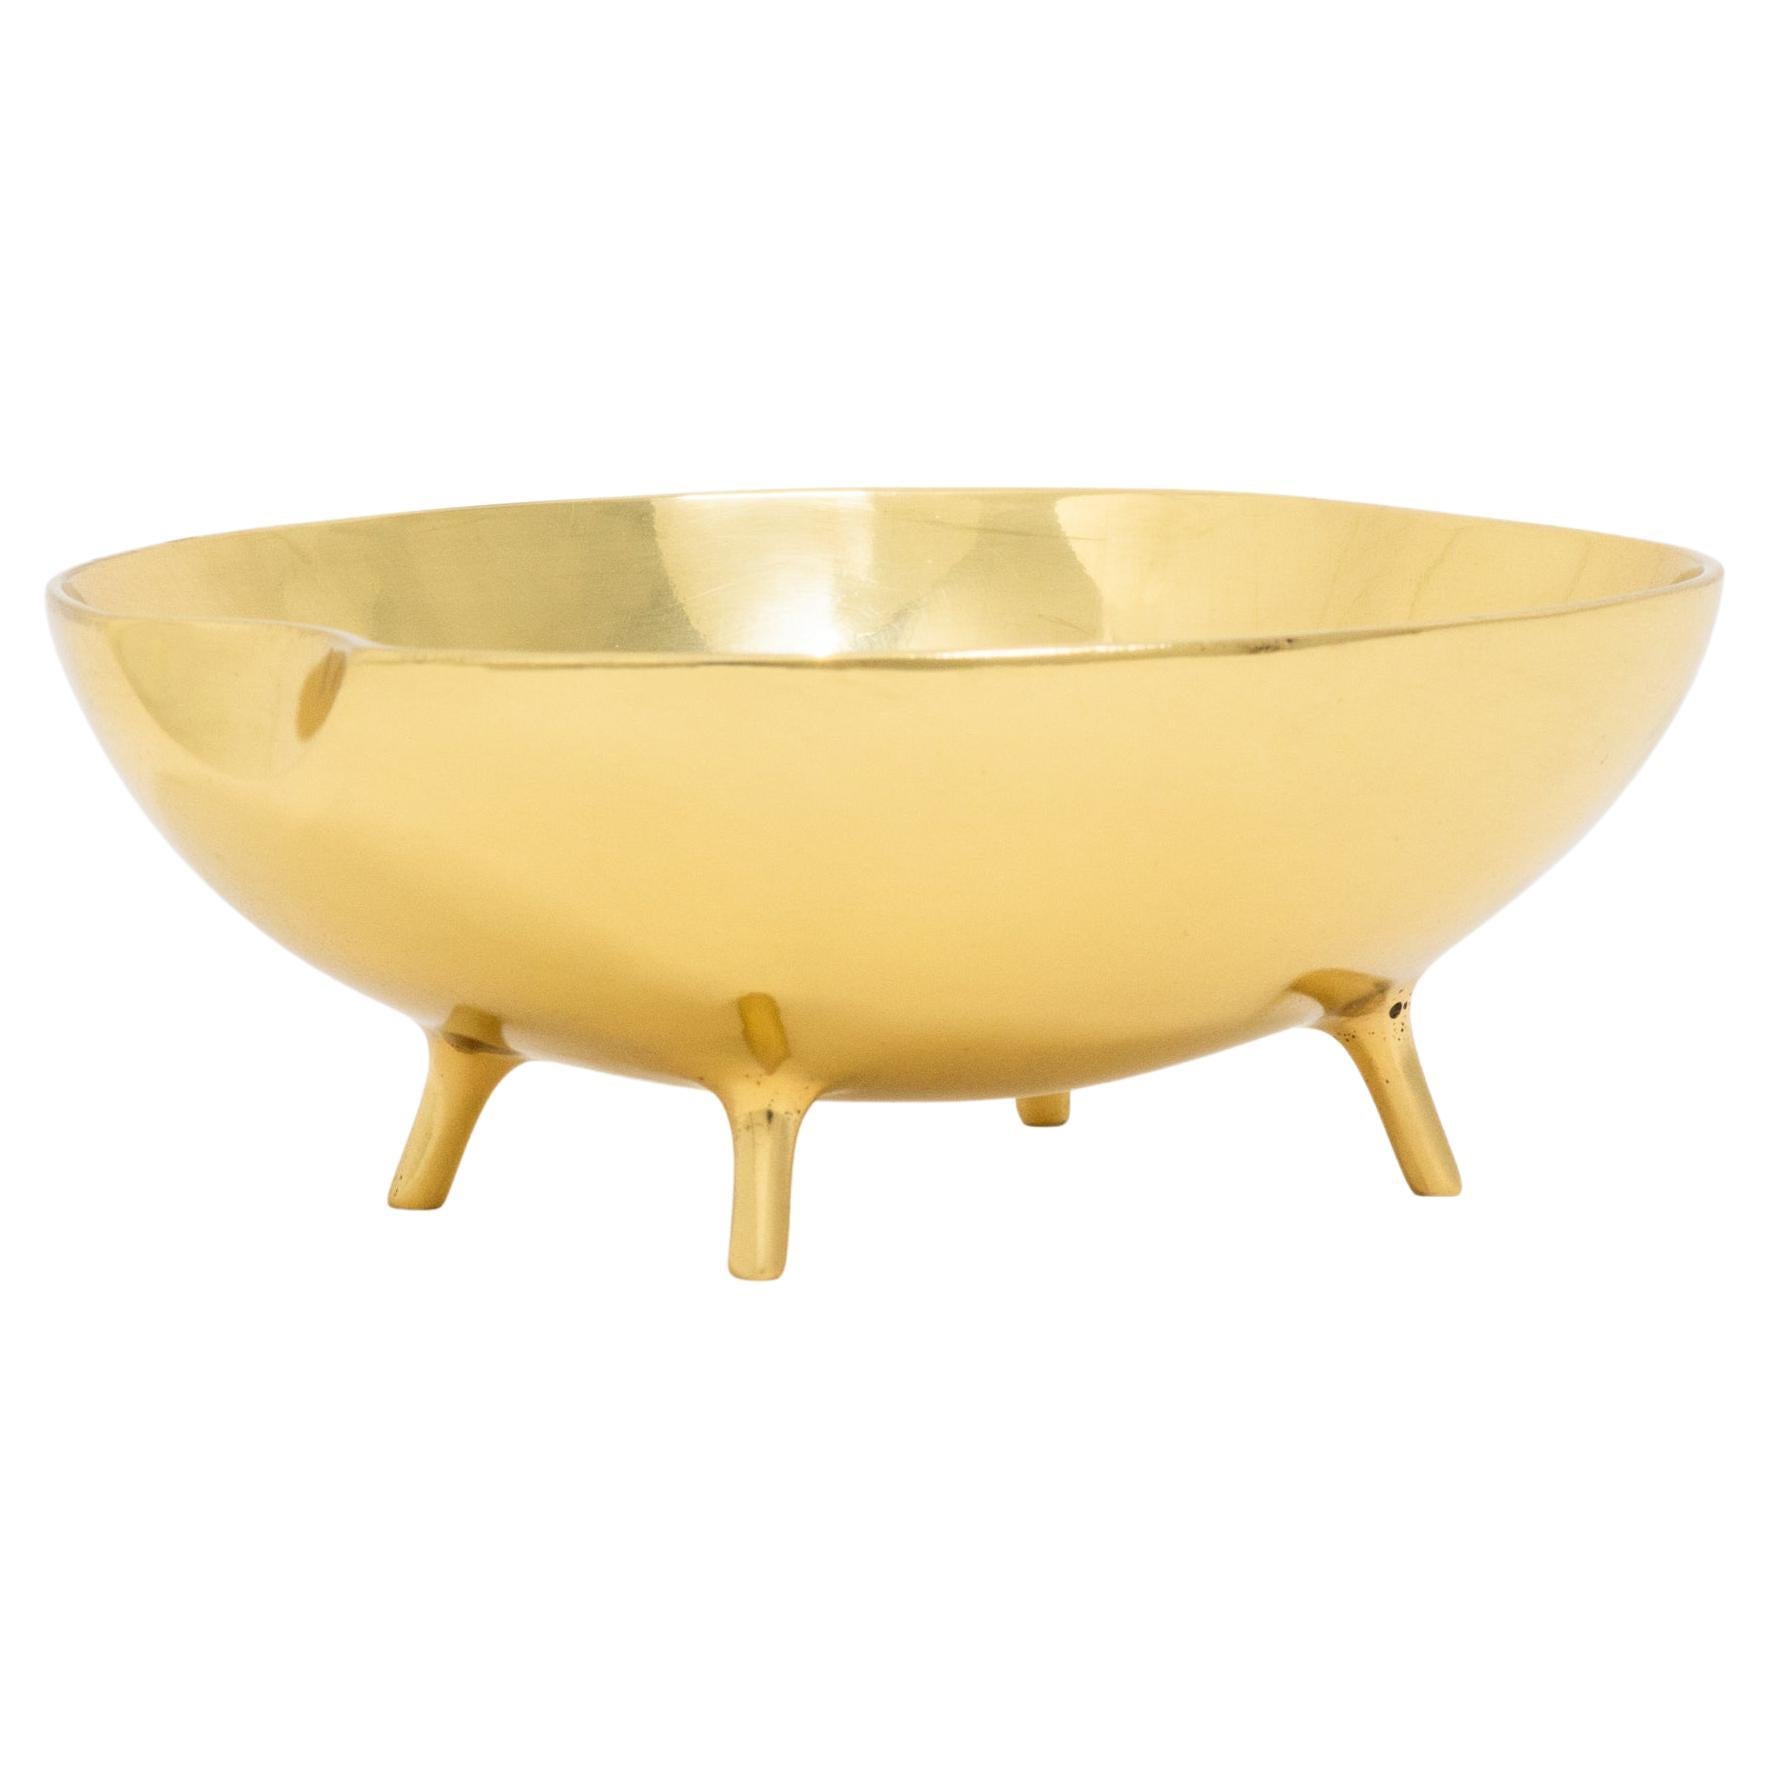 Handmade polished cast brass bowl with legs, vide-poche.

Each of those original and elegant bowls are handmade individually. Cast using very traditional techniques.

Slight variations in polished finishes, patterns and sizes are characteristics of